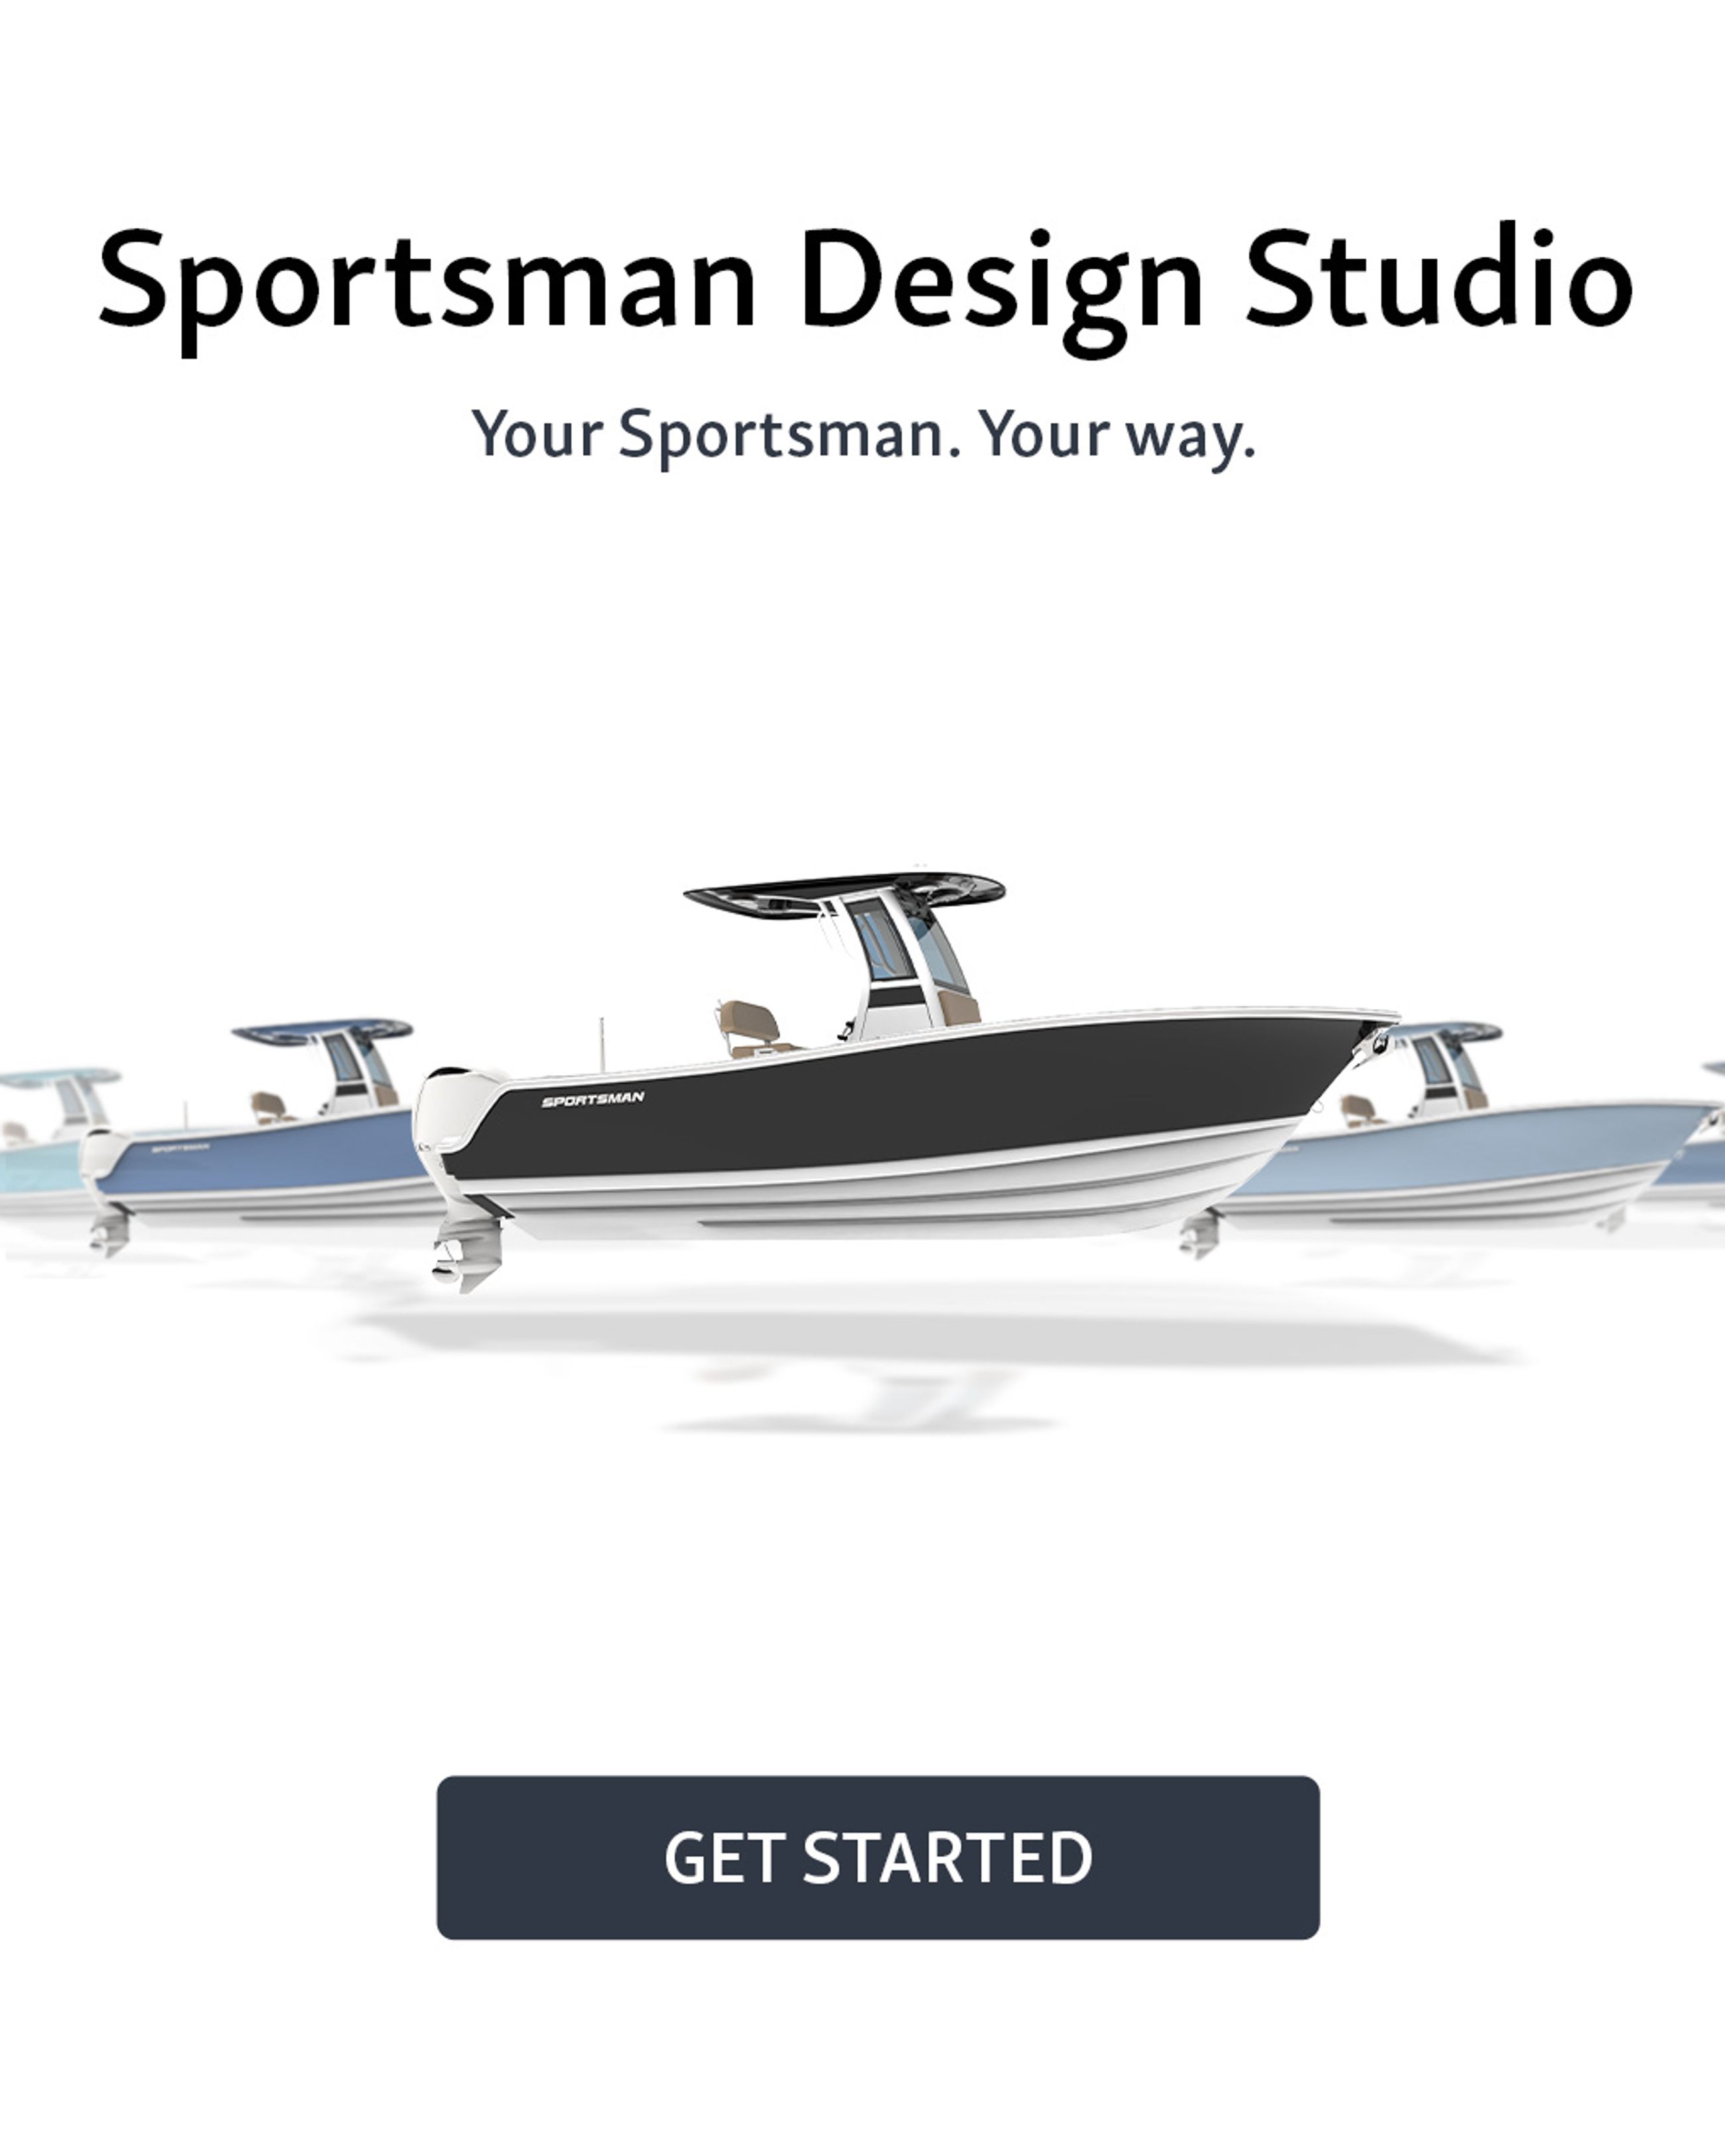 Image of custom colored Sportsman boats inviting people to try out the design studio.